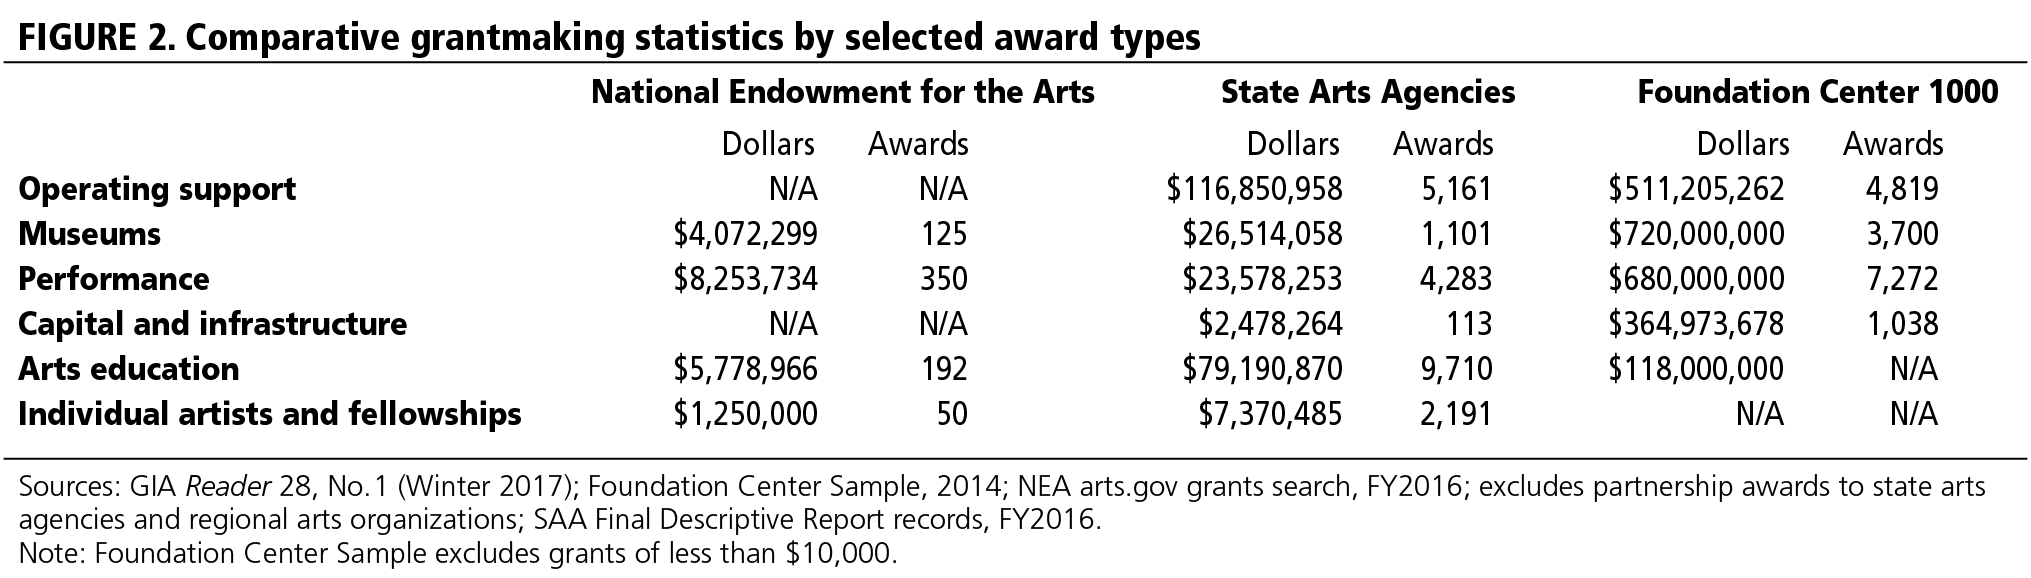 FIGURE 2. Comparative grantmaking statistics by selected award types